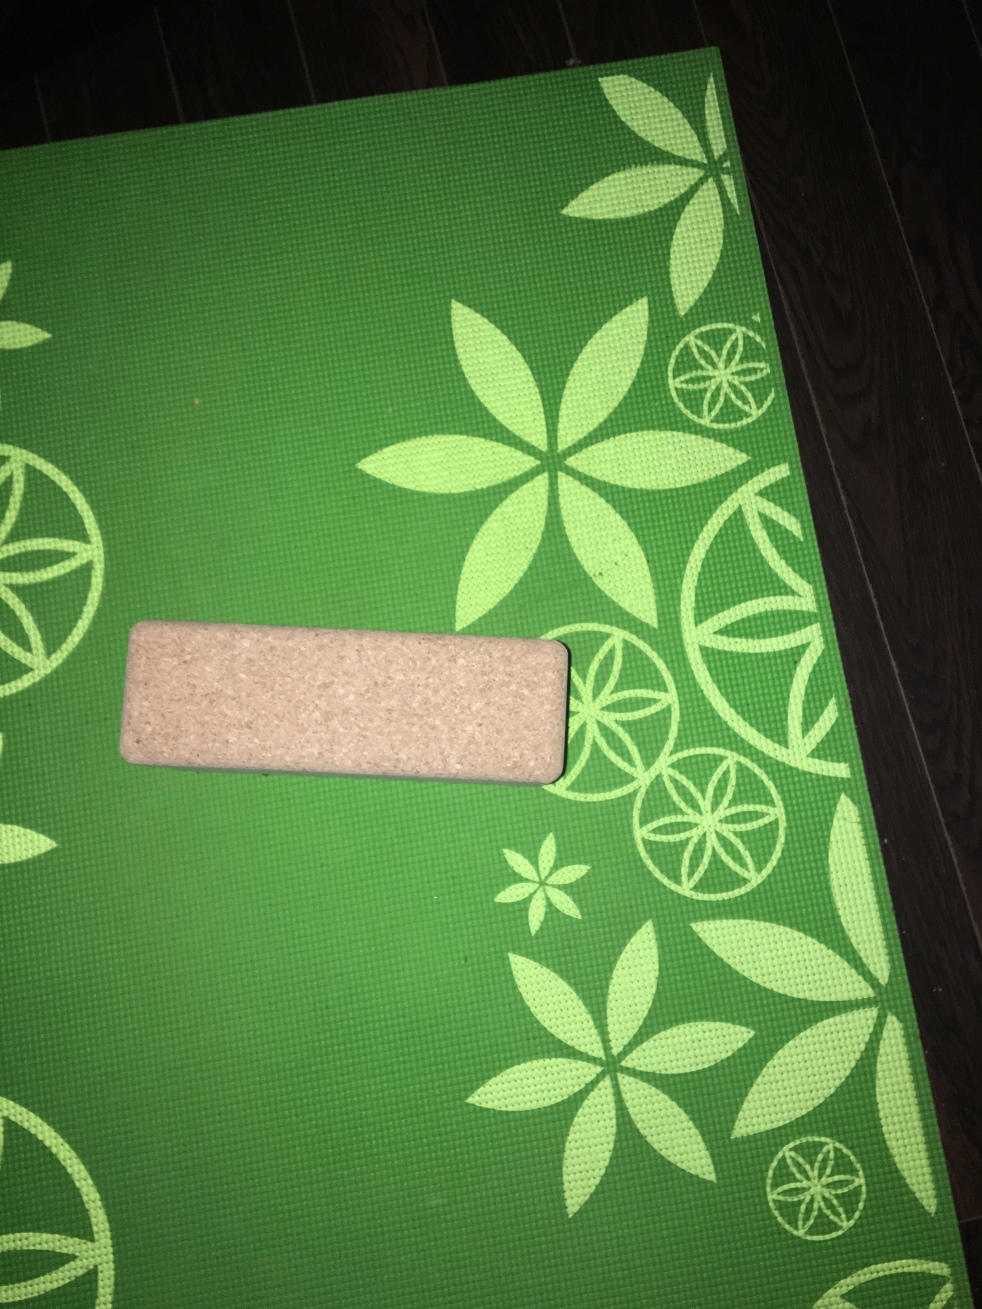 A rectangular, light brown cork yoga block sits atop a green yoga mat that is decorated with lighter green flowers. Dark brown floorboards are in the background.